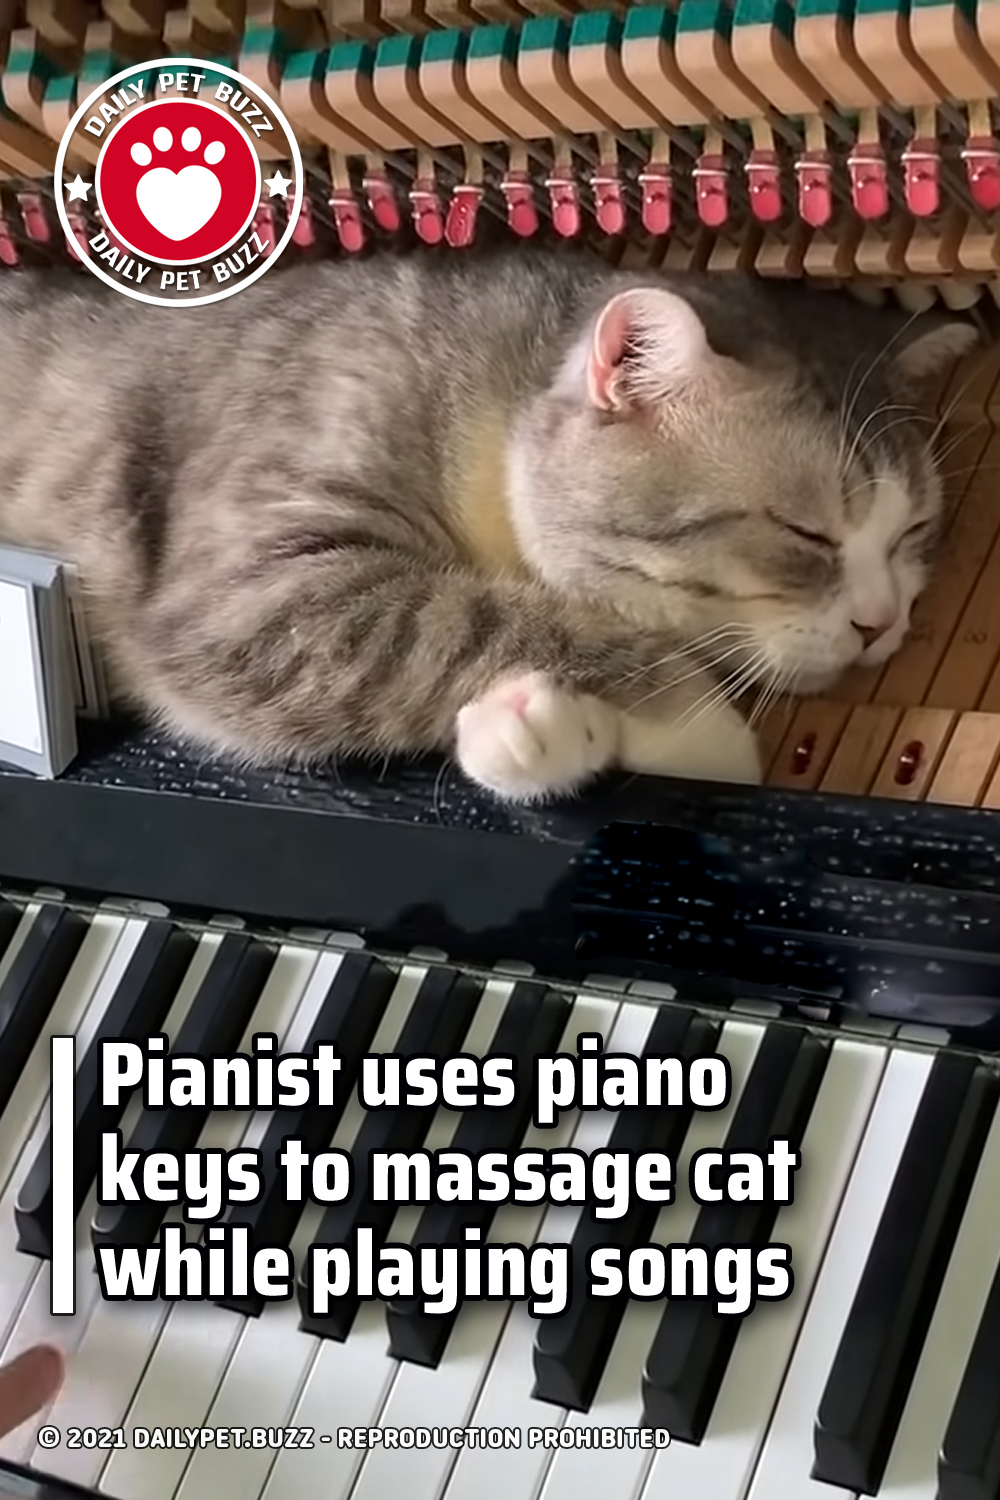 Pianist uses piano keys to massage cat while playing songs